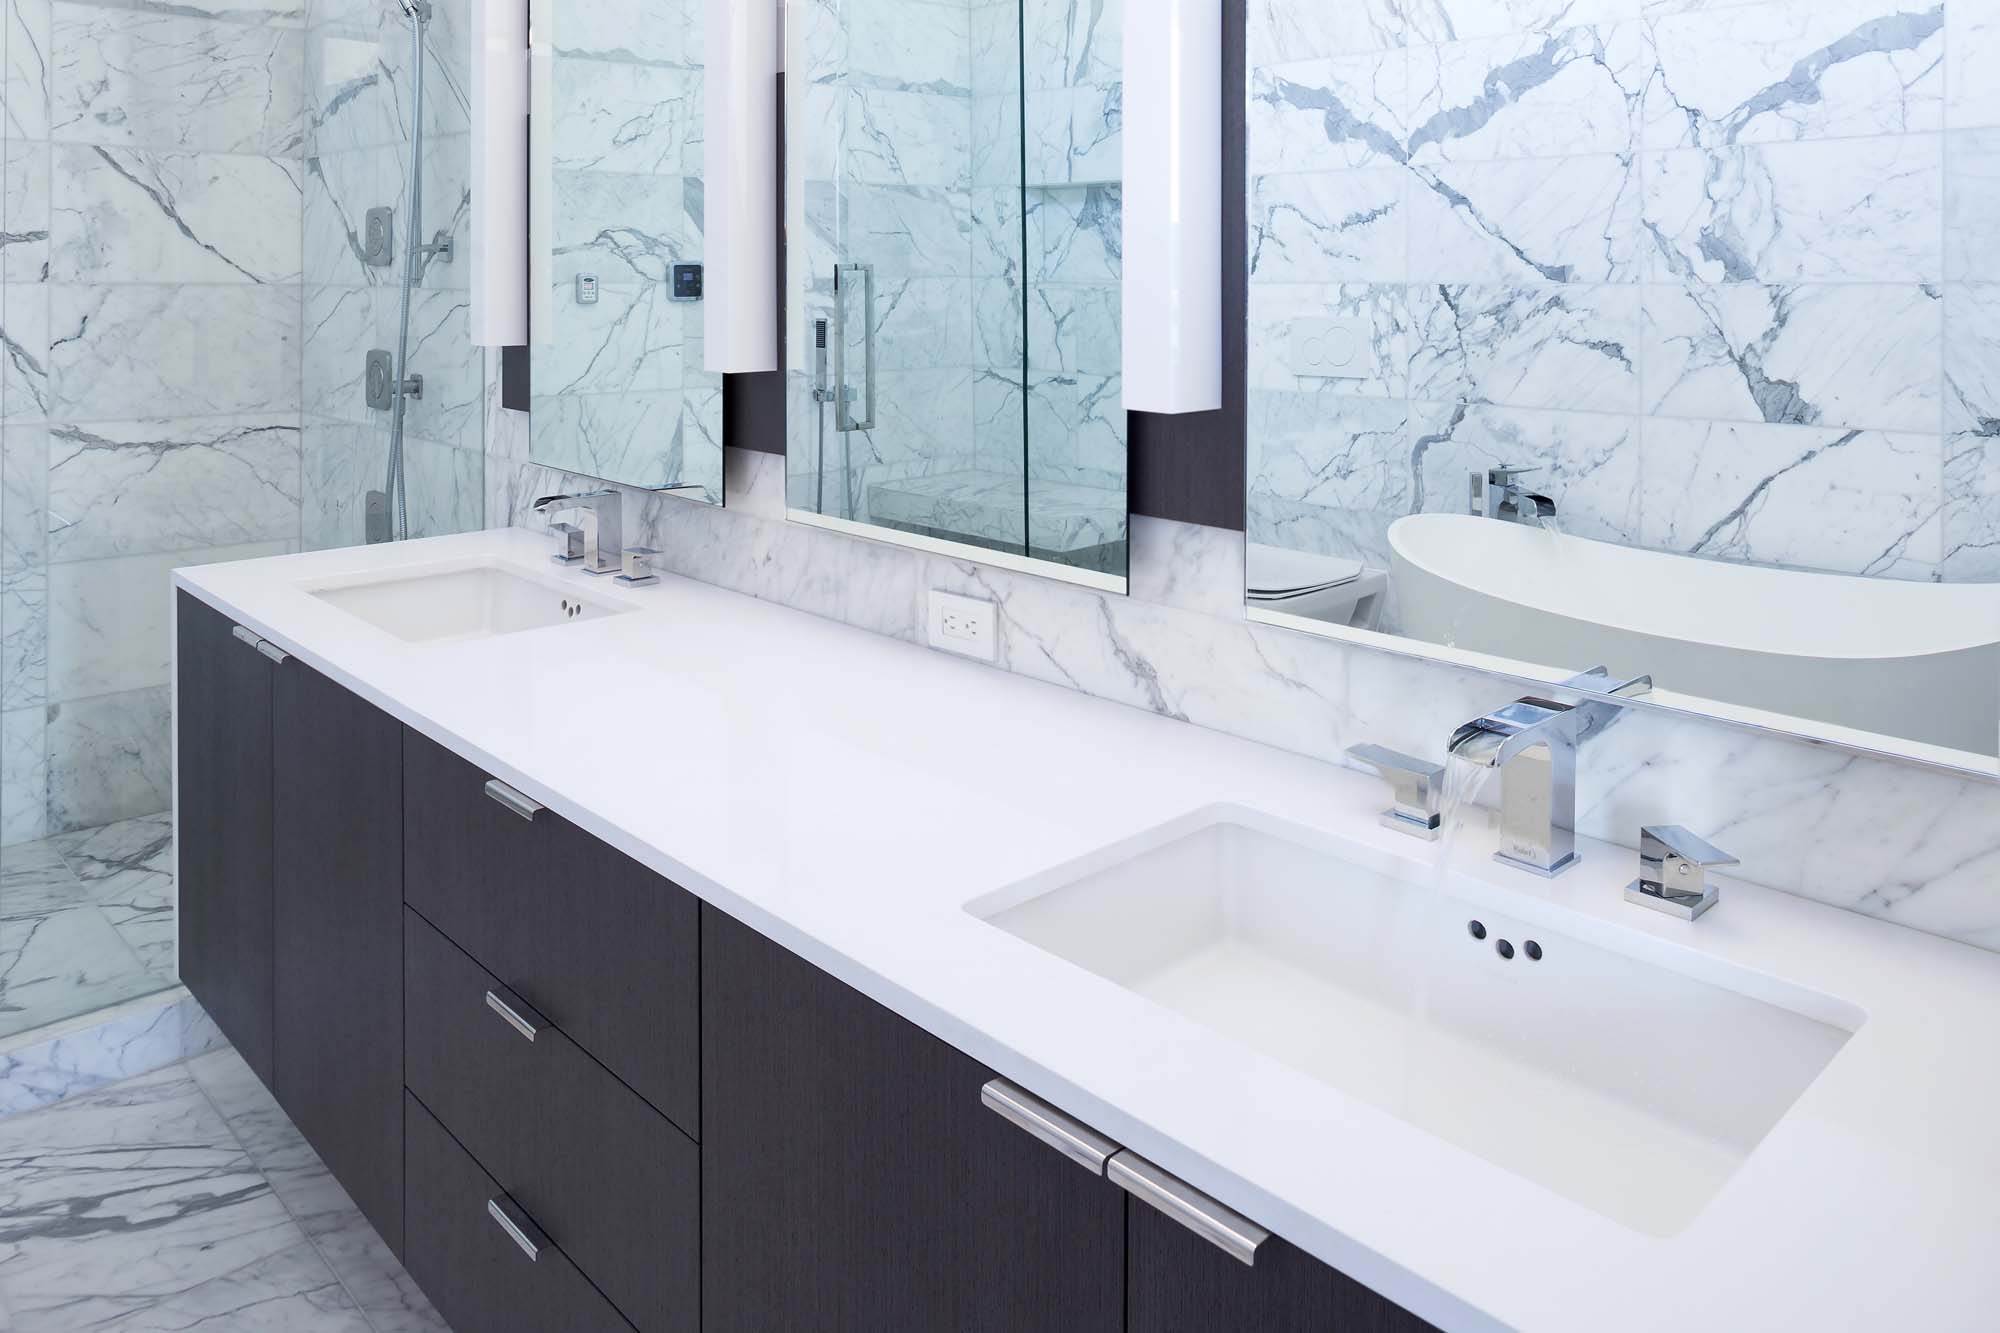 Spacious bathroom with two bathrooms and white tiles at a custom home in South Vancouver.